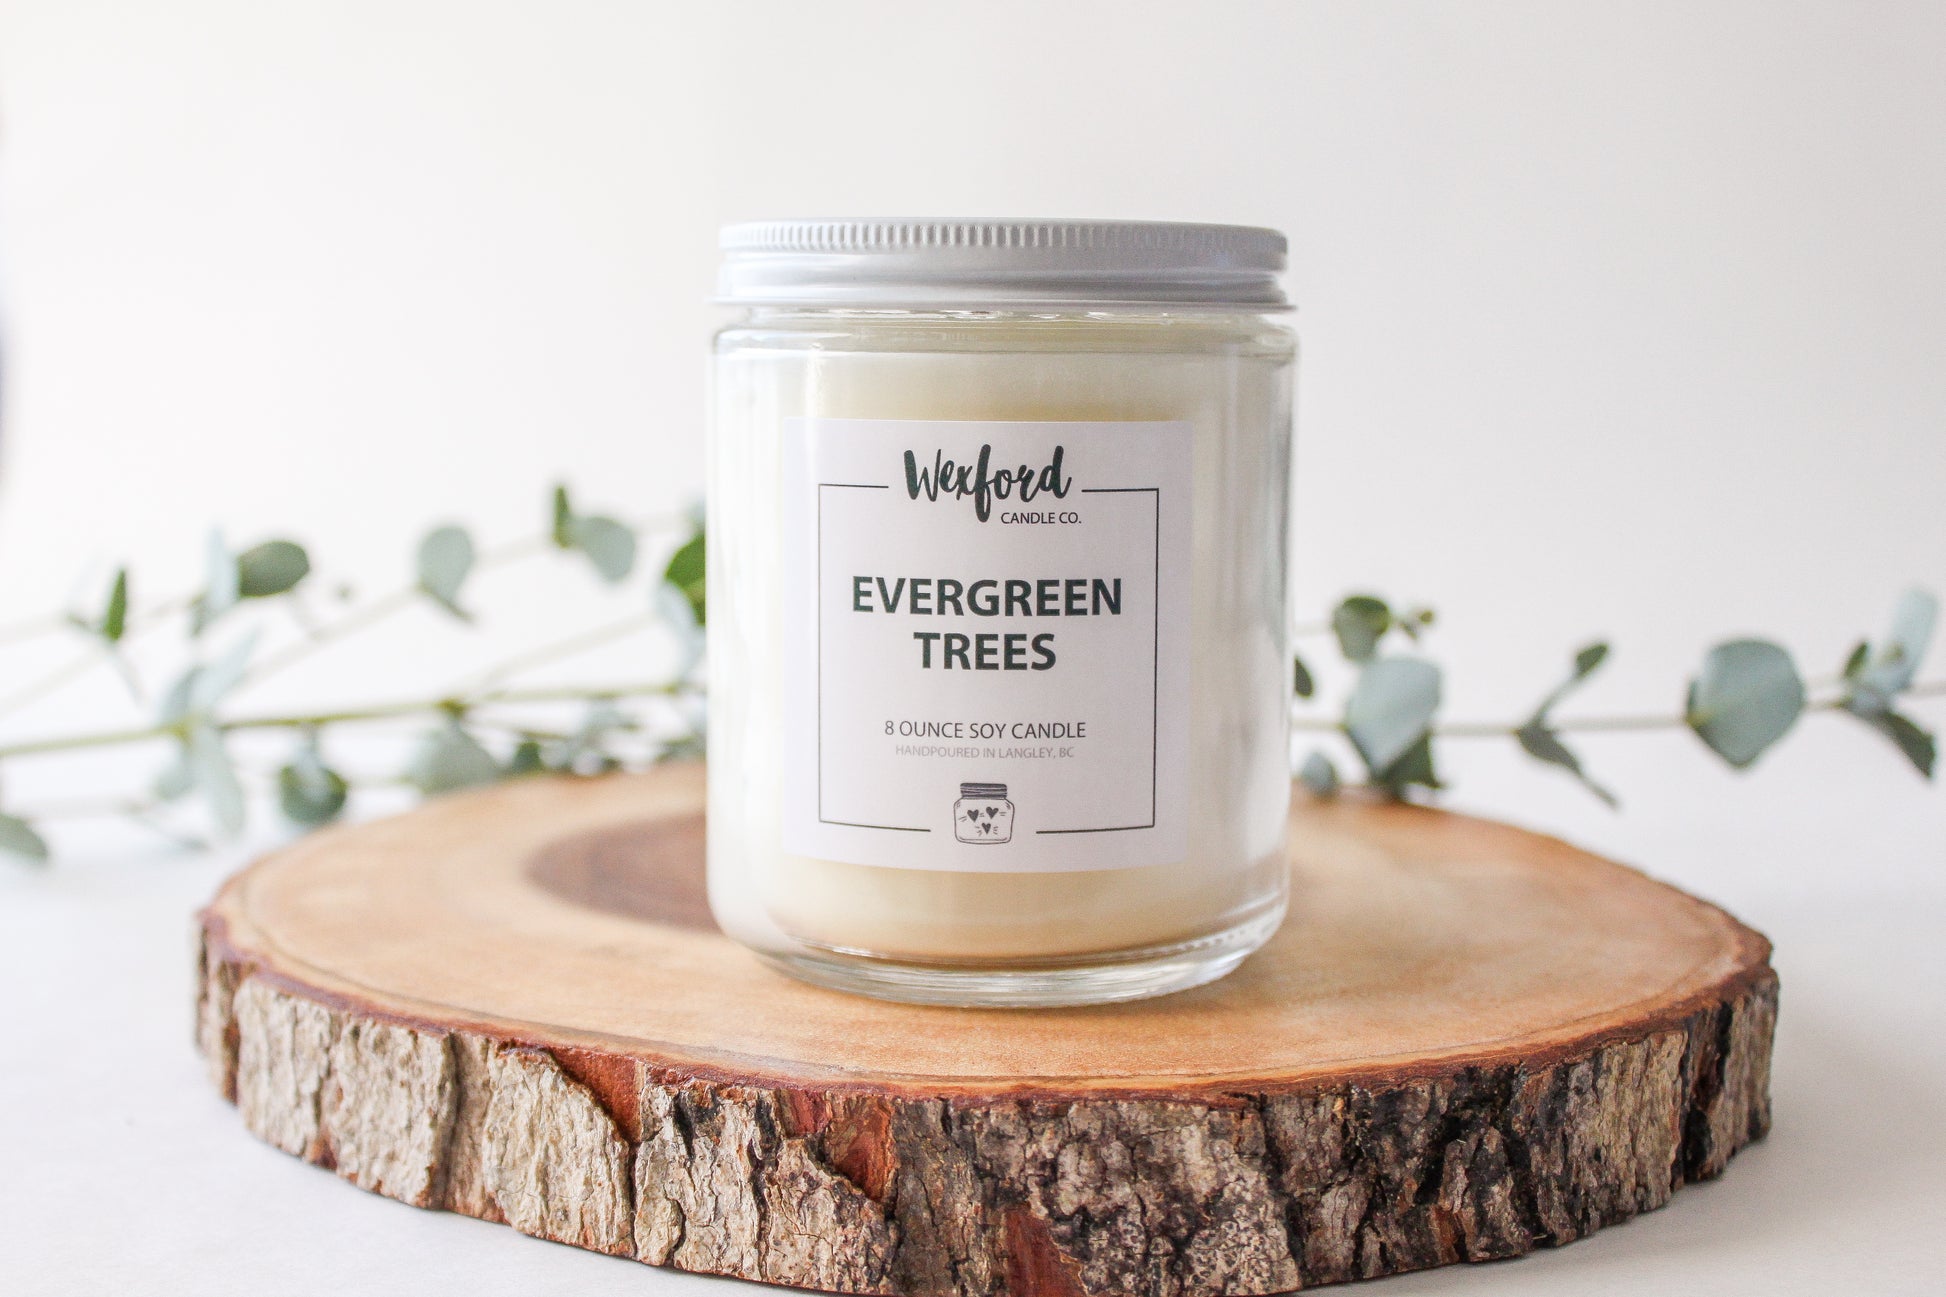 Evergreen Trees Soy Candle - Wexford Candle Co.